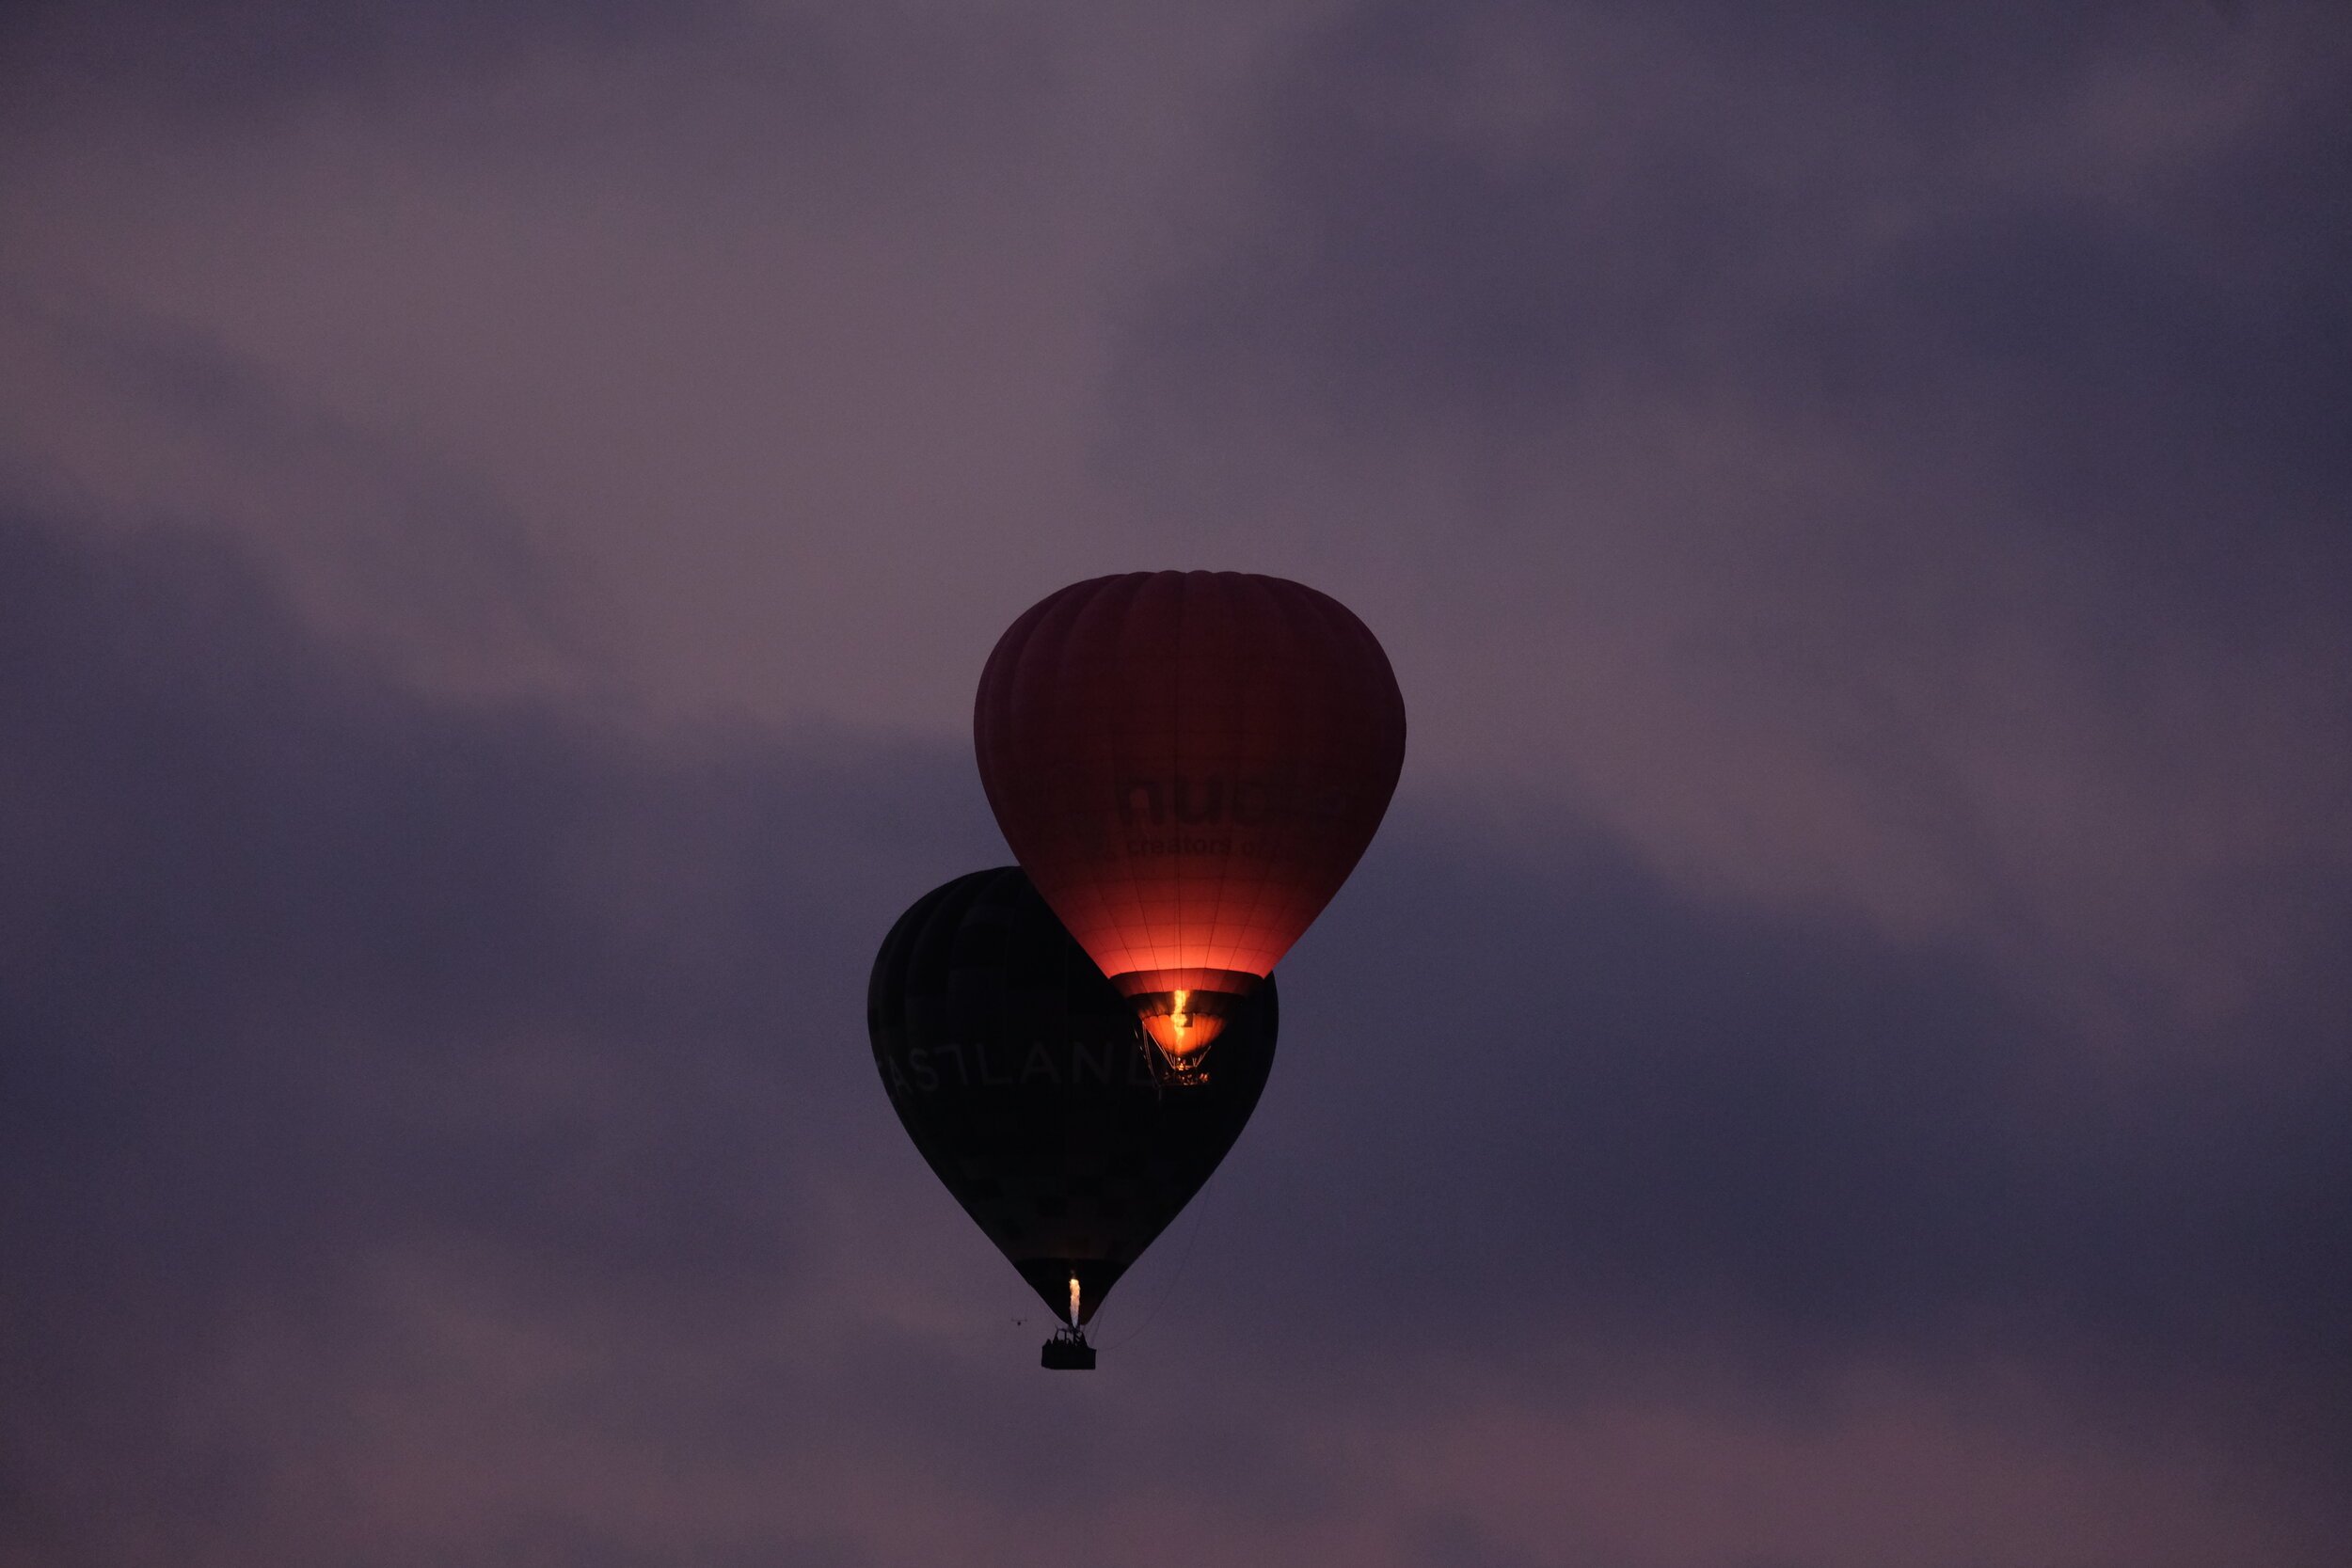 Balloons at dawn, Melbourne